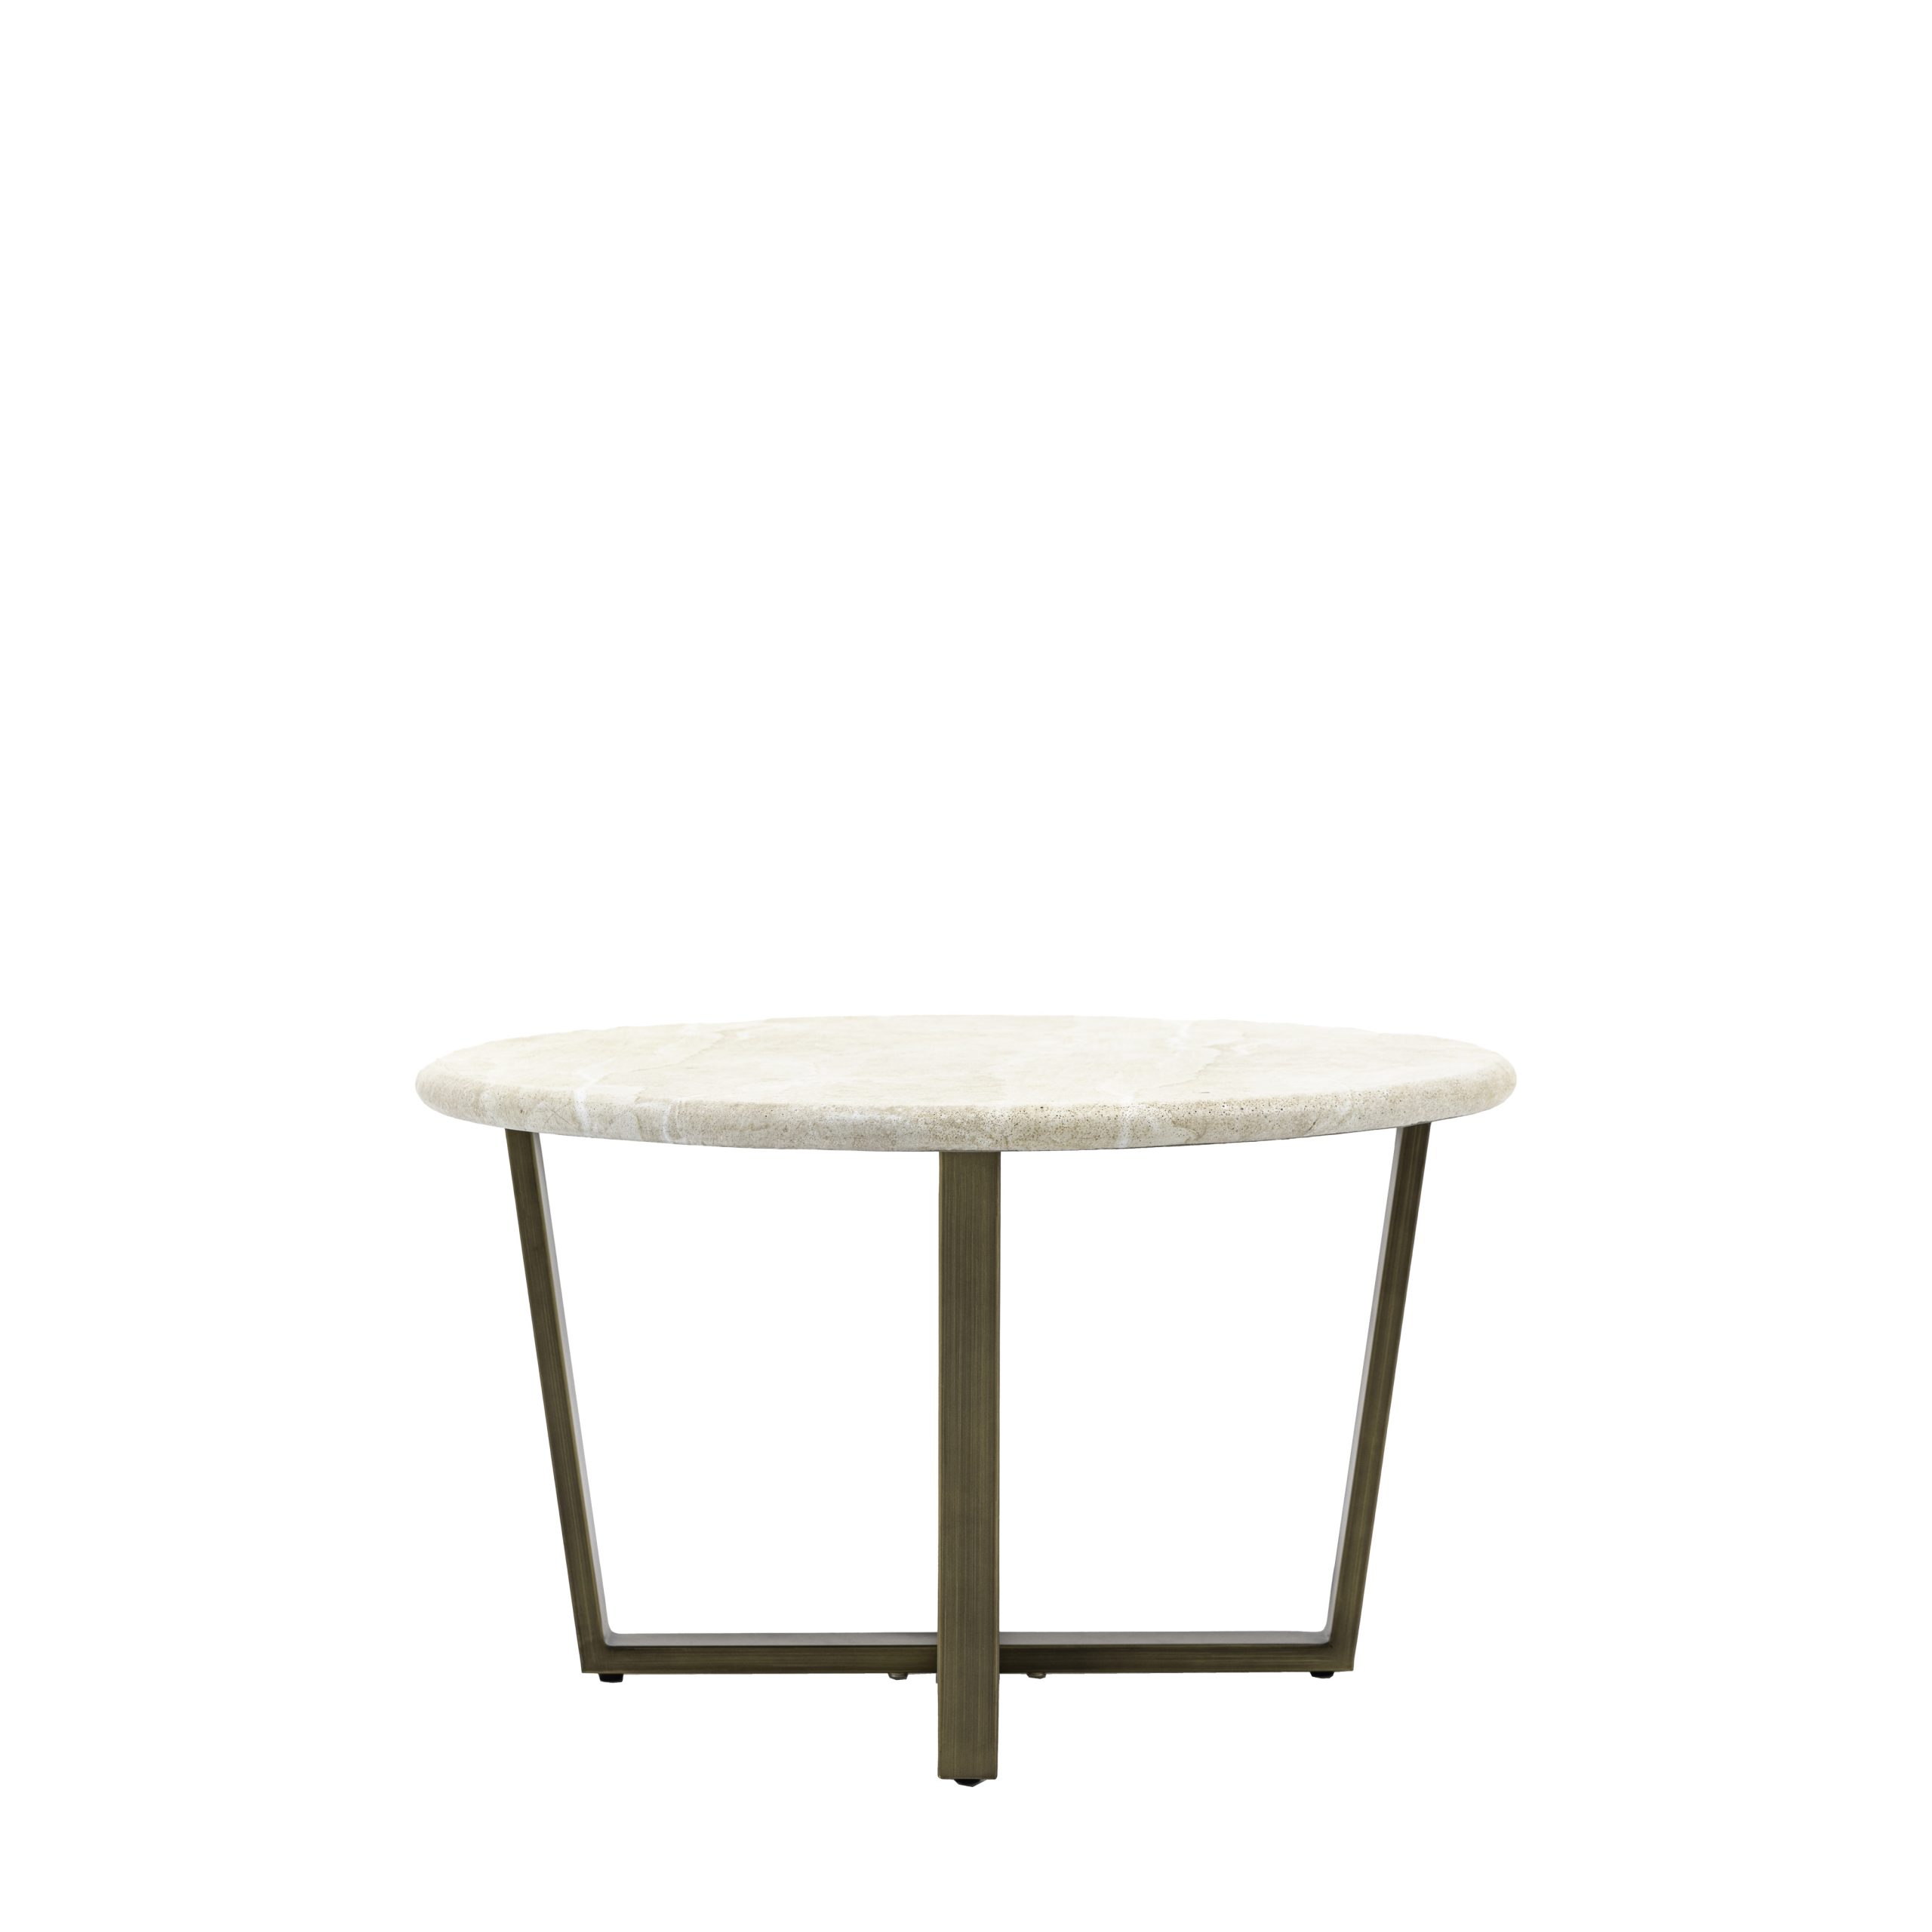 Gallery Direct Moderna Round Coffee Table